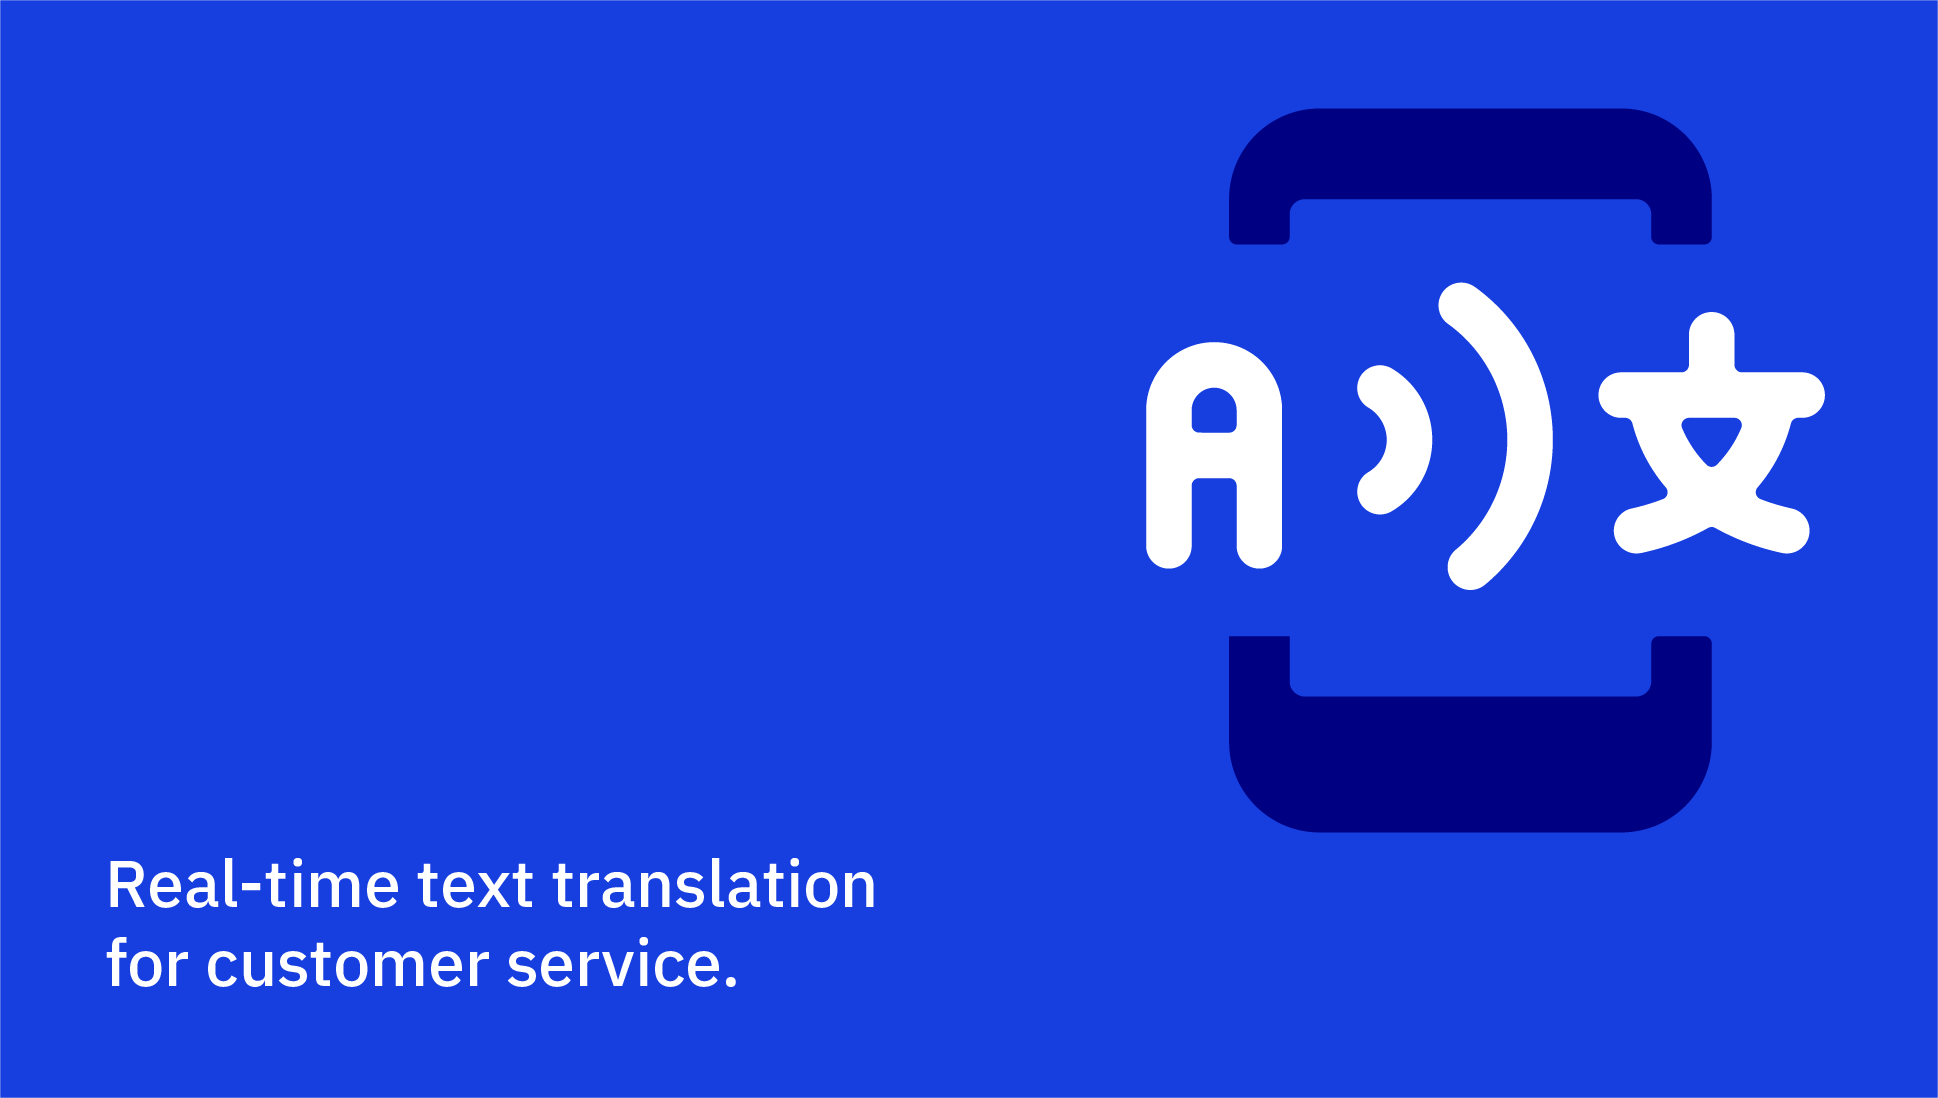 Real-time text translation for customer service